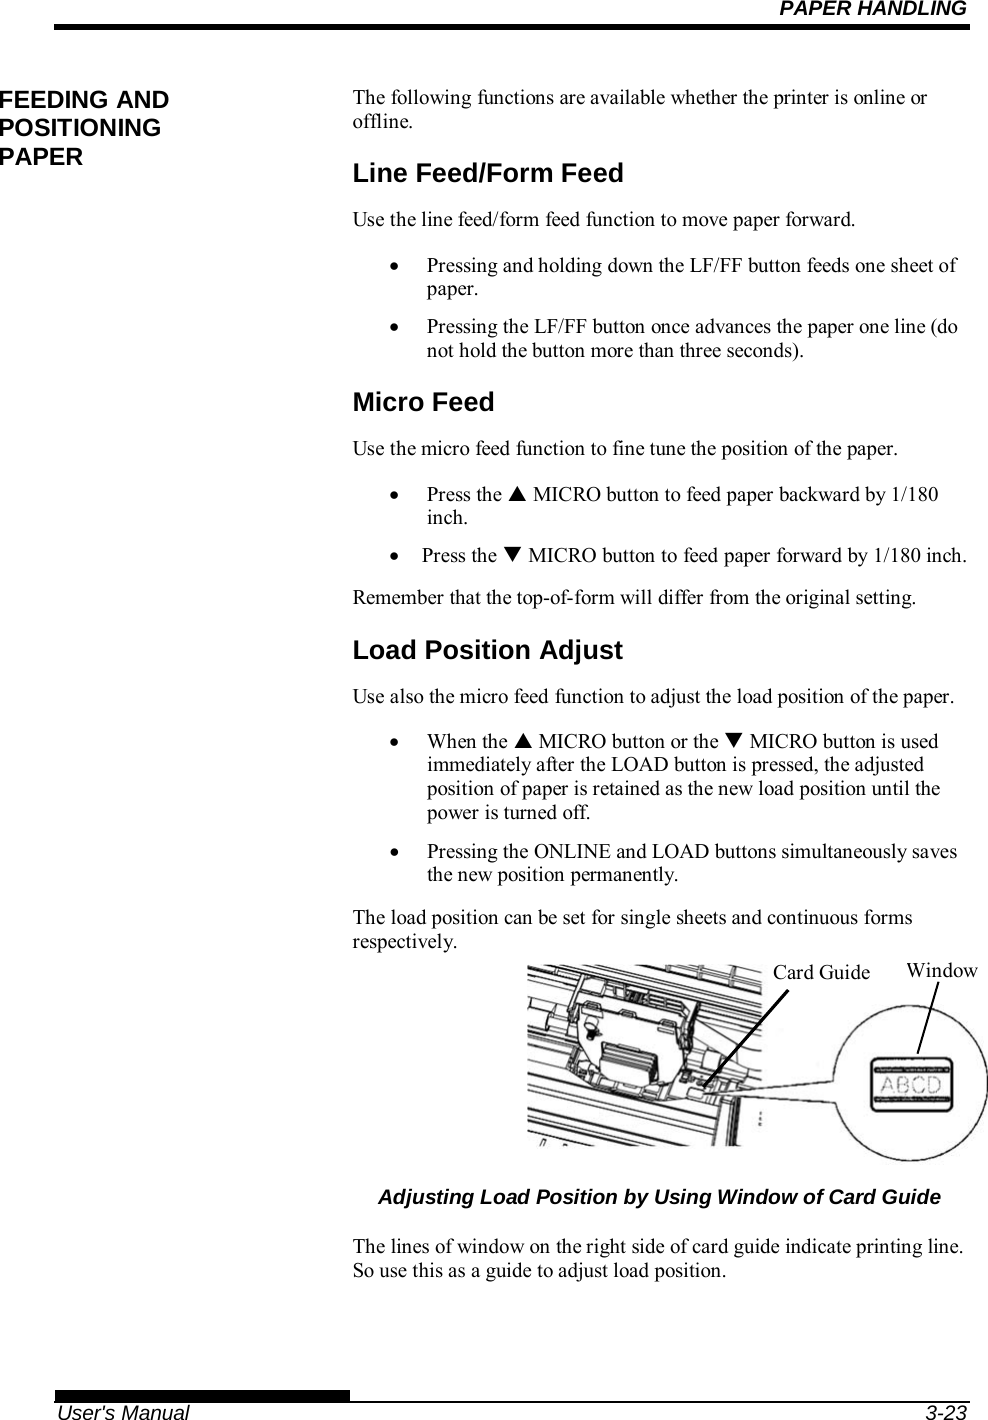 PAPER HANDLING   User&apos;s Manual  3-23 The following functions are available whether the printer is online or offline. Line Feed/Form Feed Use the line feed/form feed function to move paper forward.   Pressing and holding down the LF/FF button feeds one sheet of paper.   Pressing the LF/FF button once advances the paper one line (do not hold the button more than three seconds). Micro Feed Use the micro feed function to fine tune the position of the paper.  Press the  MICRO button to feed paper backward by 1/180 inch.  Press the  MICRO button to feed paper forward by 1/180 inch.  Remember that the top-of-form will differ from the original setting. Load Position Adjust Use also the micro feed function to adjust the load position of the paper.  When the  MICRO button or the  MICRO button is used immediately after the LOAD button is pressed, the adjusted position of paper is retained as the new load position until the power is turned off.   Pressing the ONLINE and LOAD buttons simultaneously saves the new position permanently. The load position can be set for single sheets and continuous forms respectively.      Adjusting Load Position by Using Window of Card Guide  The lines of window on the right side of card guide indicate printing line. So use this as a guide to adjust load position.  FEEDING AND POSITIONING PAPER WindowCard Guide 